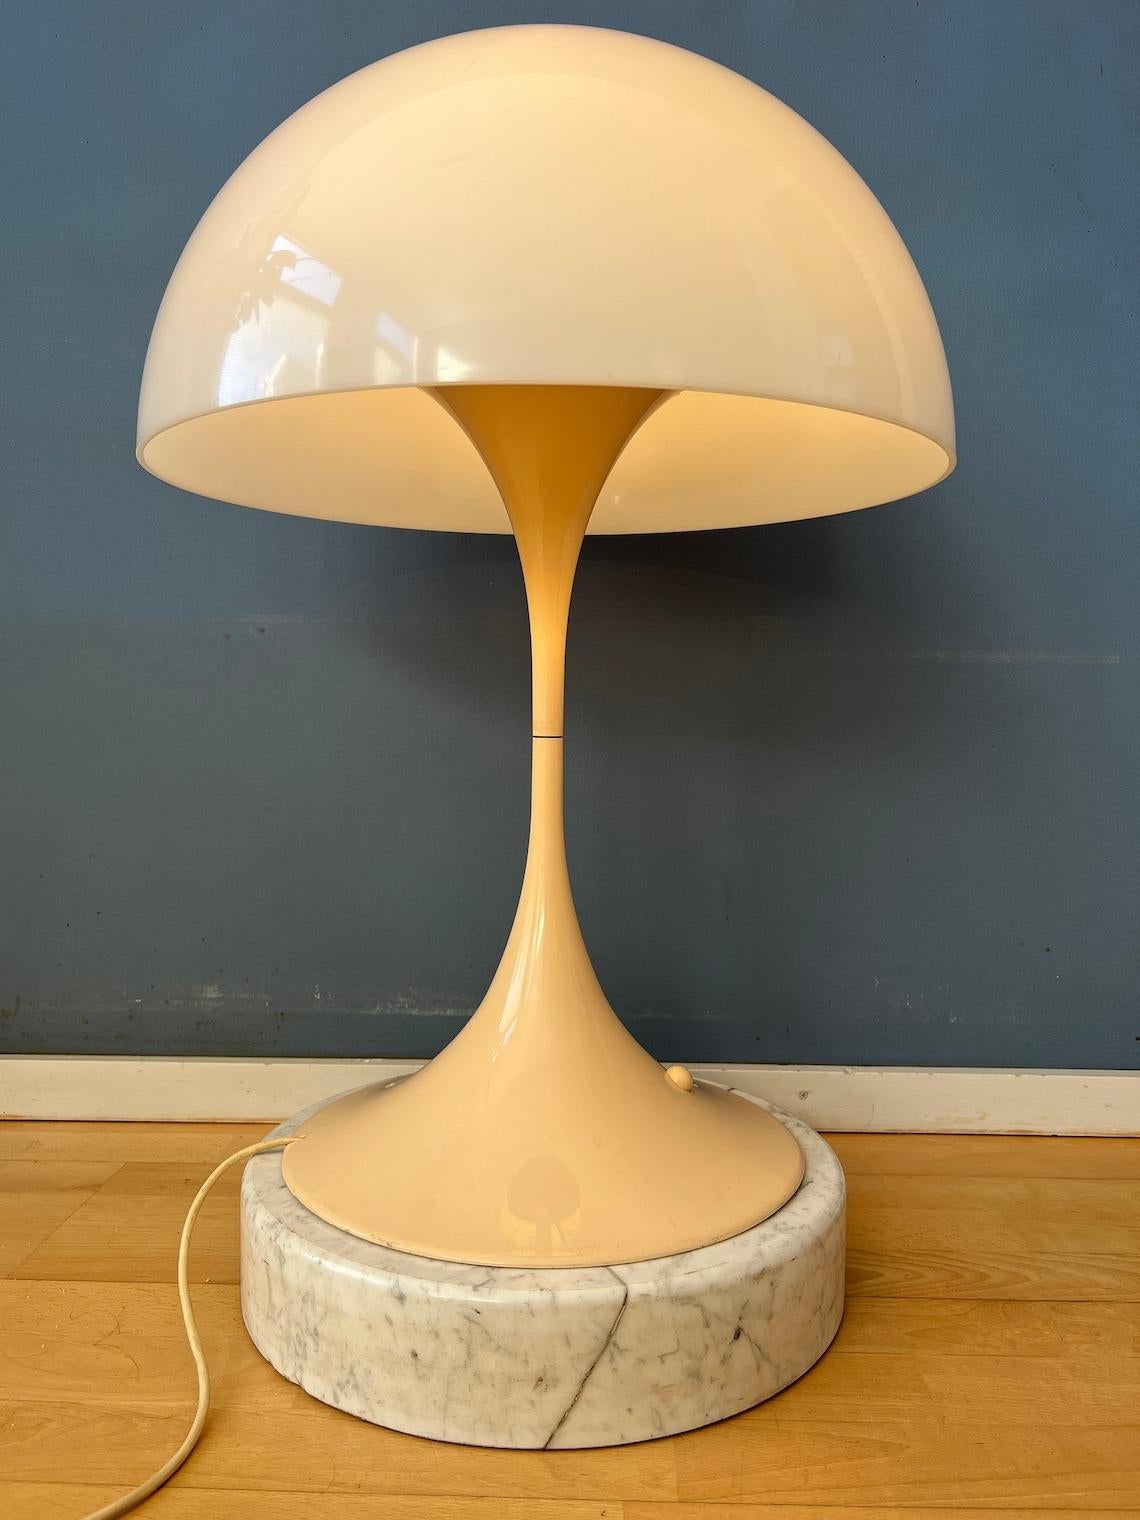 Iconic Louis Poulsen Panthella mushroom floor table lamp by Verner Panton. The lamp requires one E27 lightbulb and currently has a EU-plug (easily used outside EU with different plug or plug-converter).

Additional information:
Materials: Metal,